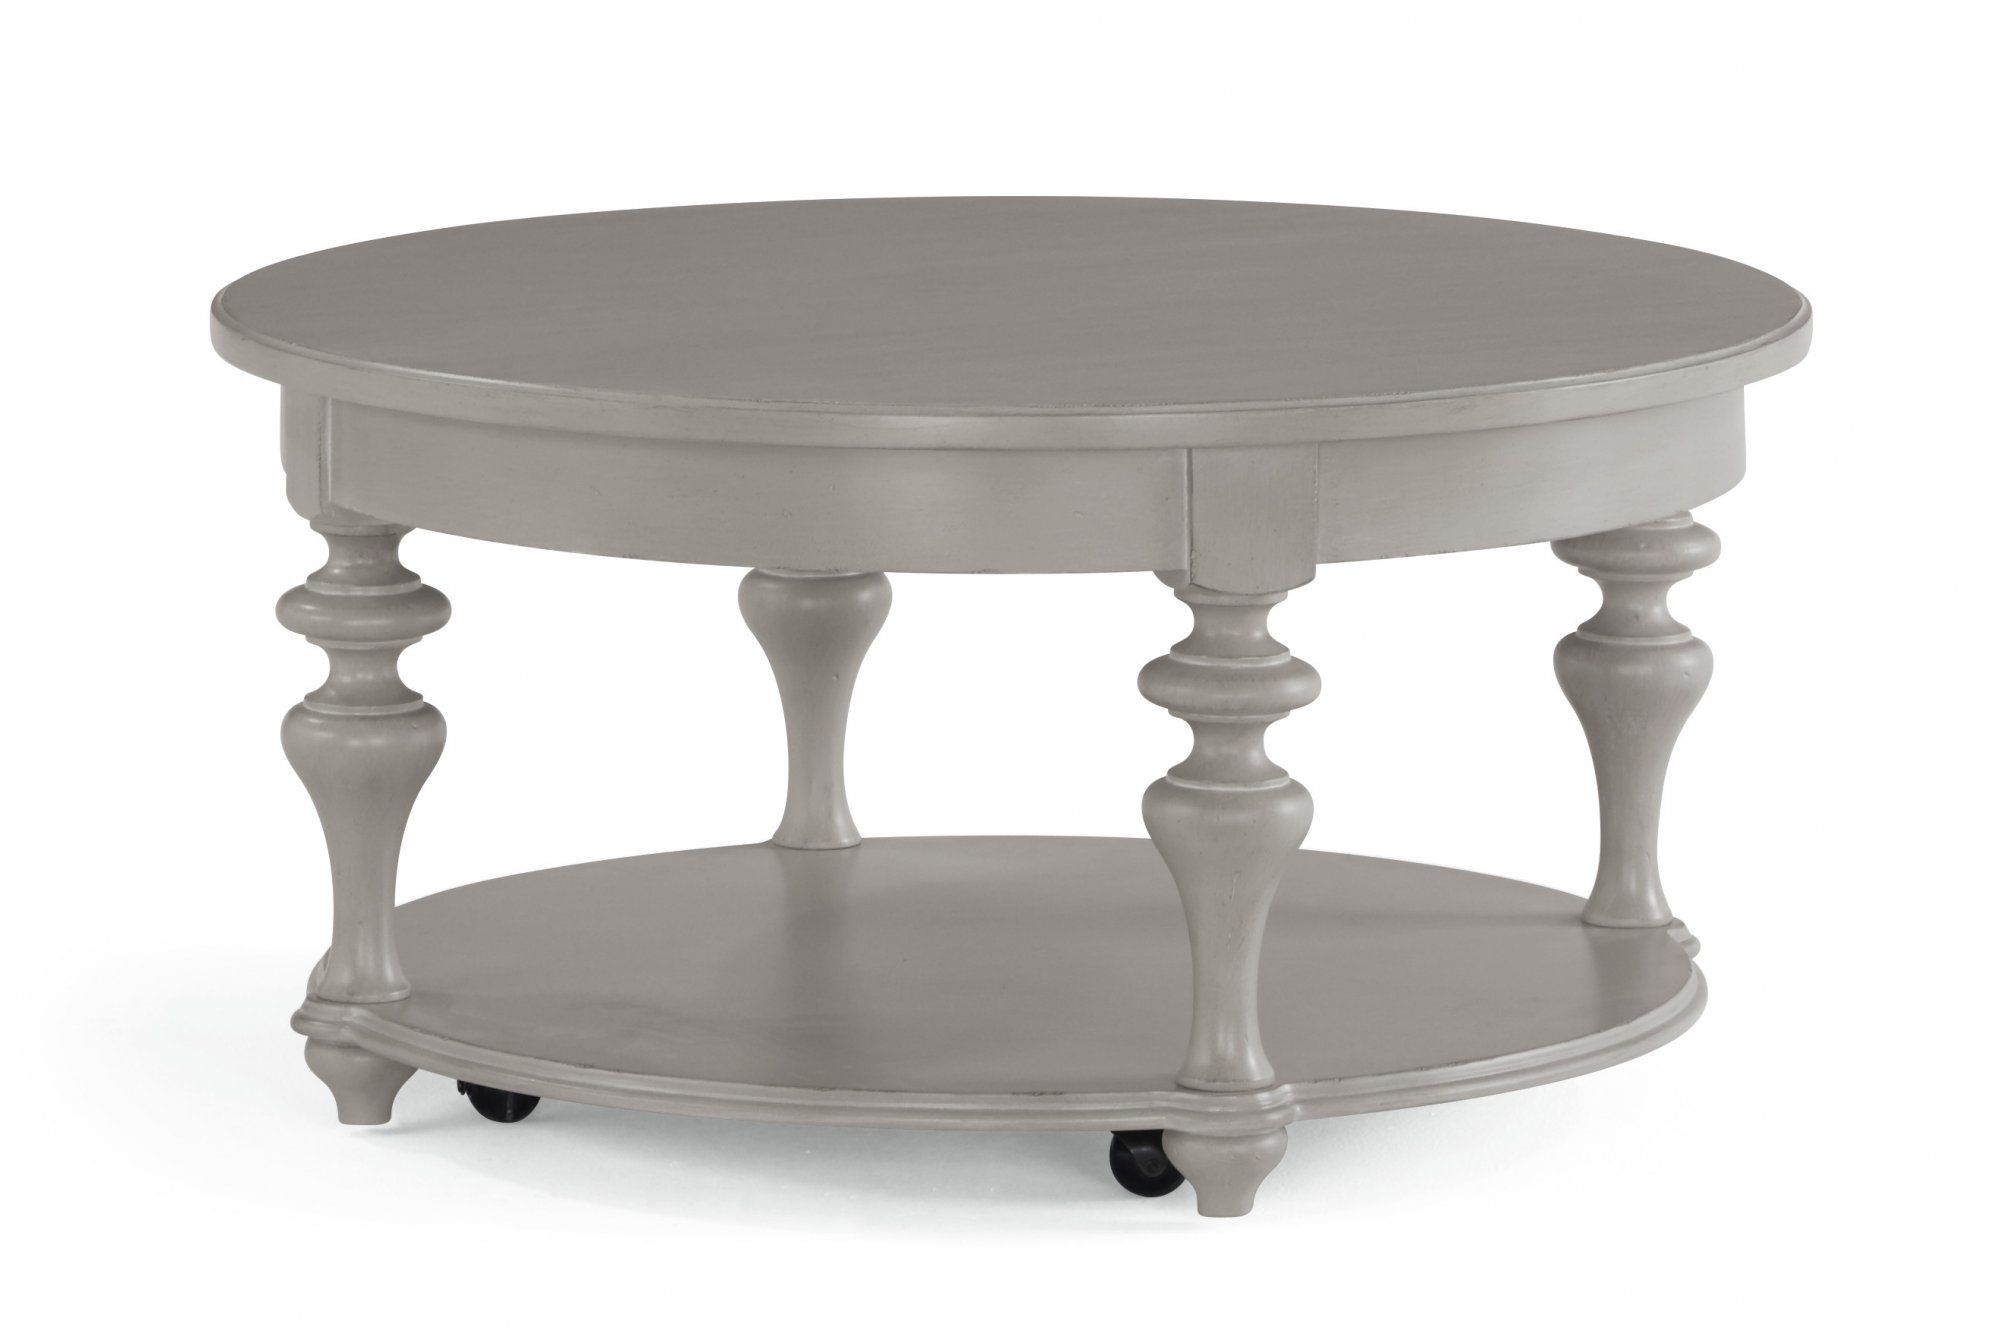 Heirloom Round Coffee Table With Casters W1065 0341flexsteel In Coffee Tables With Casters (Gallery 15 of 21)